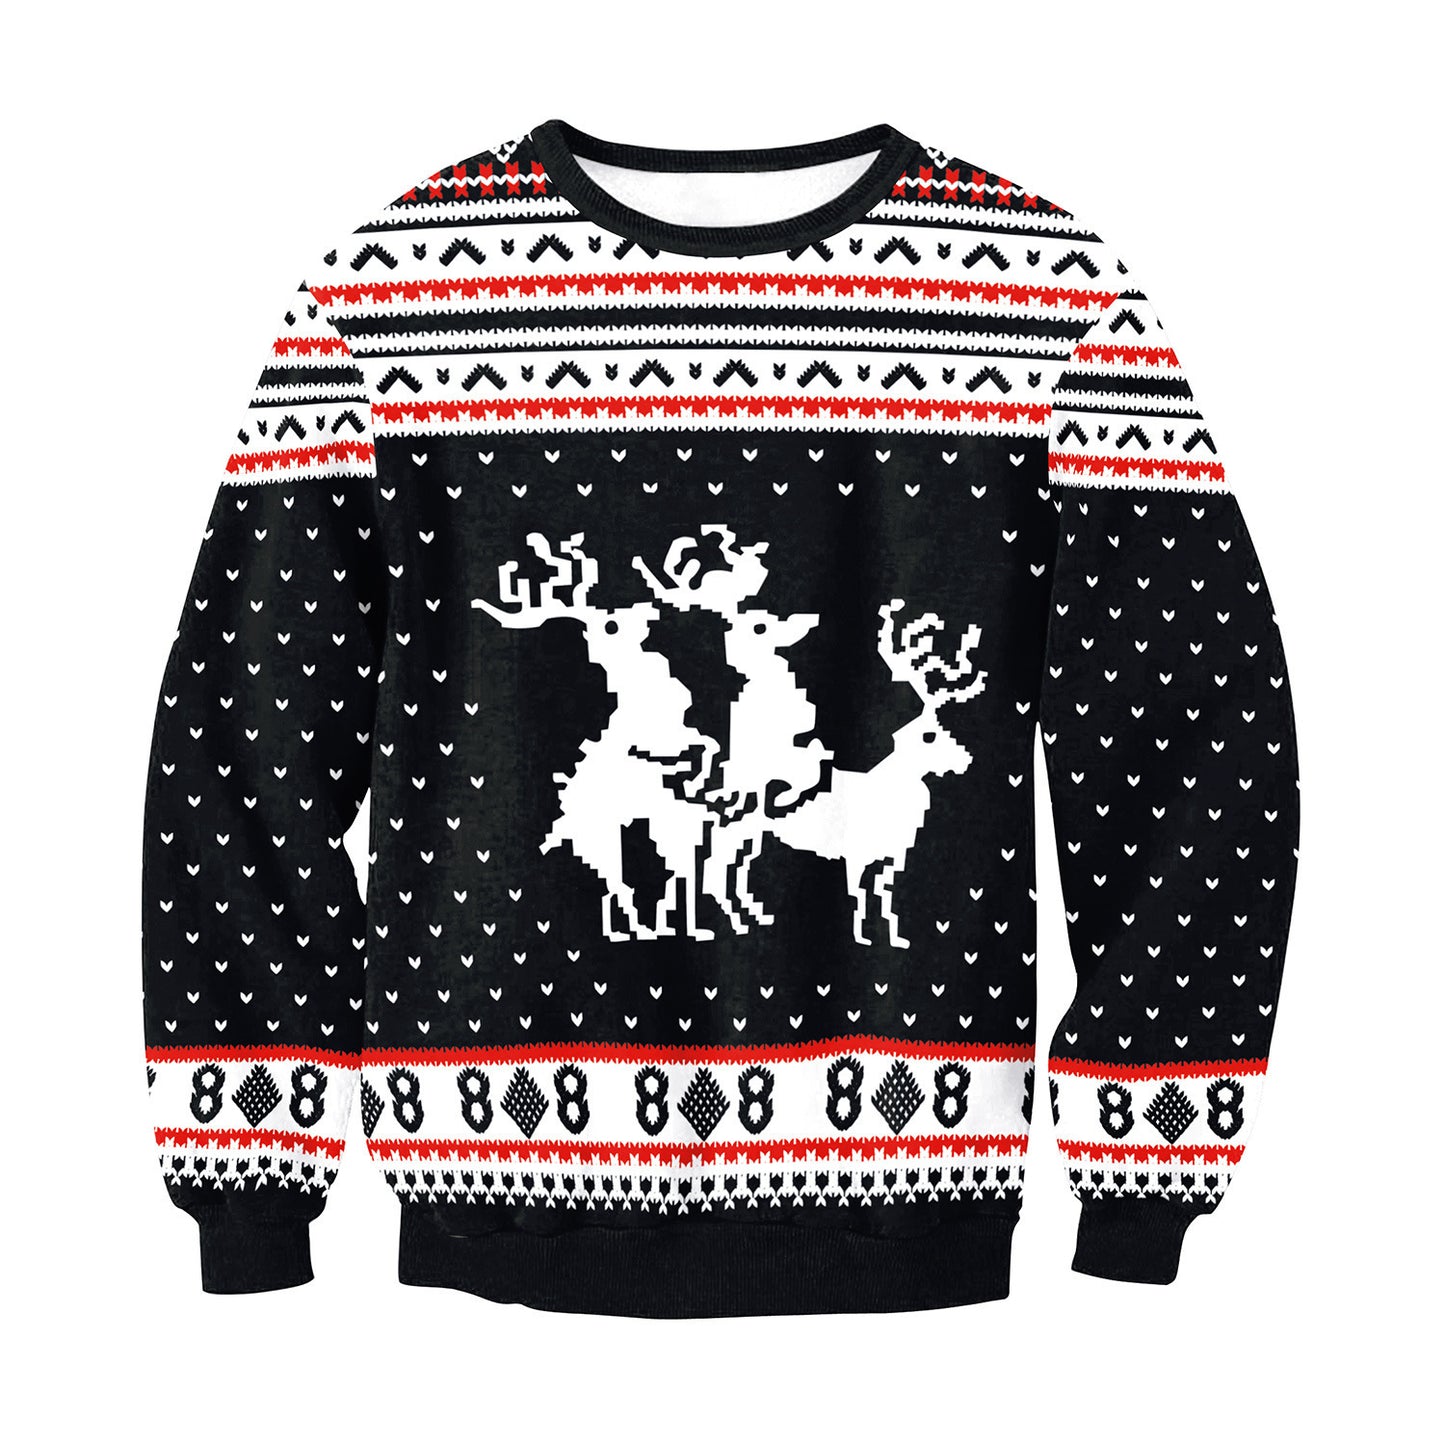 UGLY CHRISTMAS SWEATER Vacation Santa Elf Funny Womens Men Sweaters Tops Autumn Winter Clothing